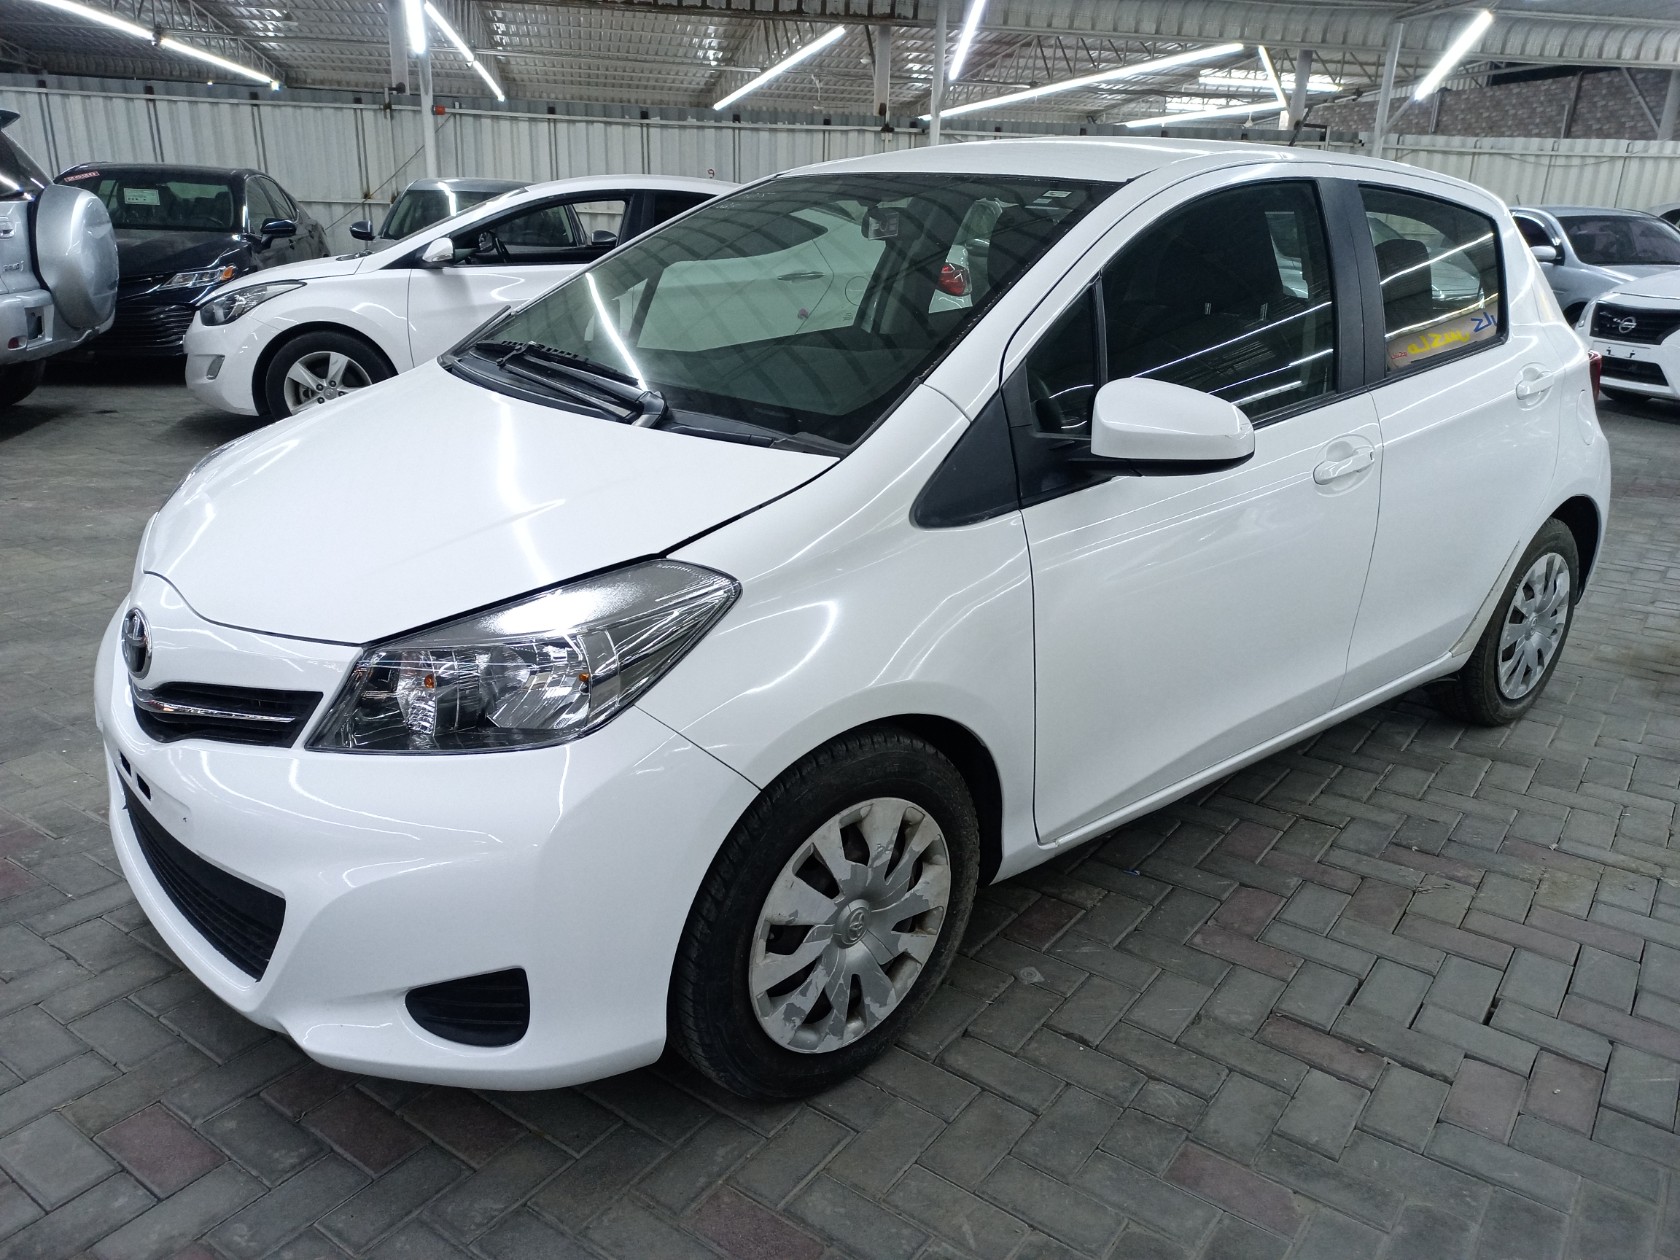 Smart Choice, Big Value - Own Feature-Rich 2015 Toyota Yaris for Less